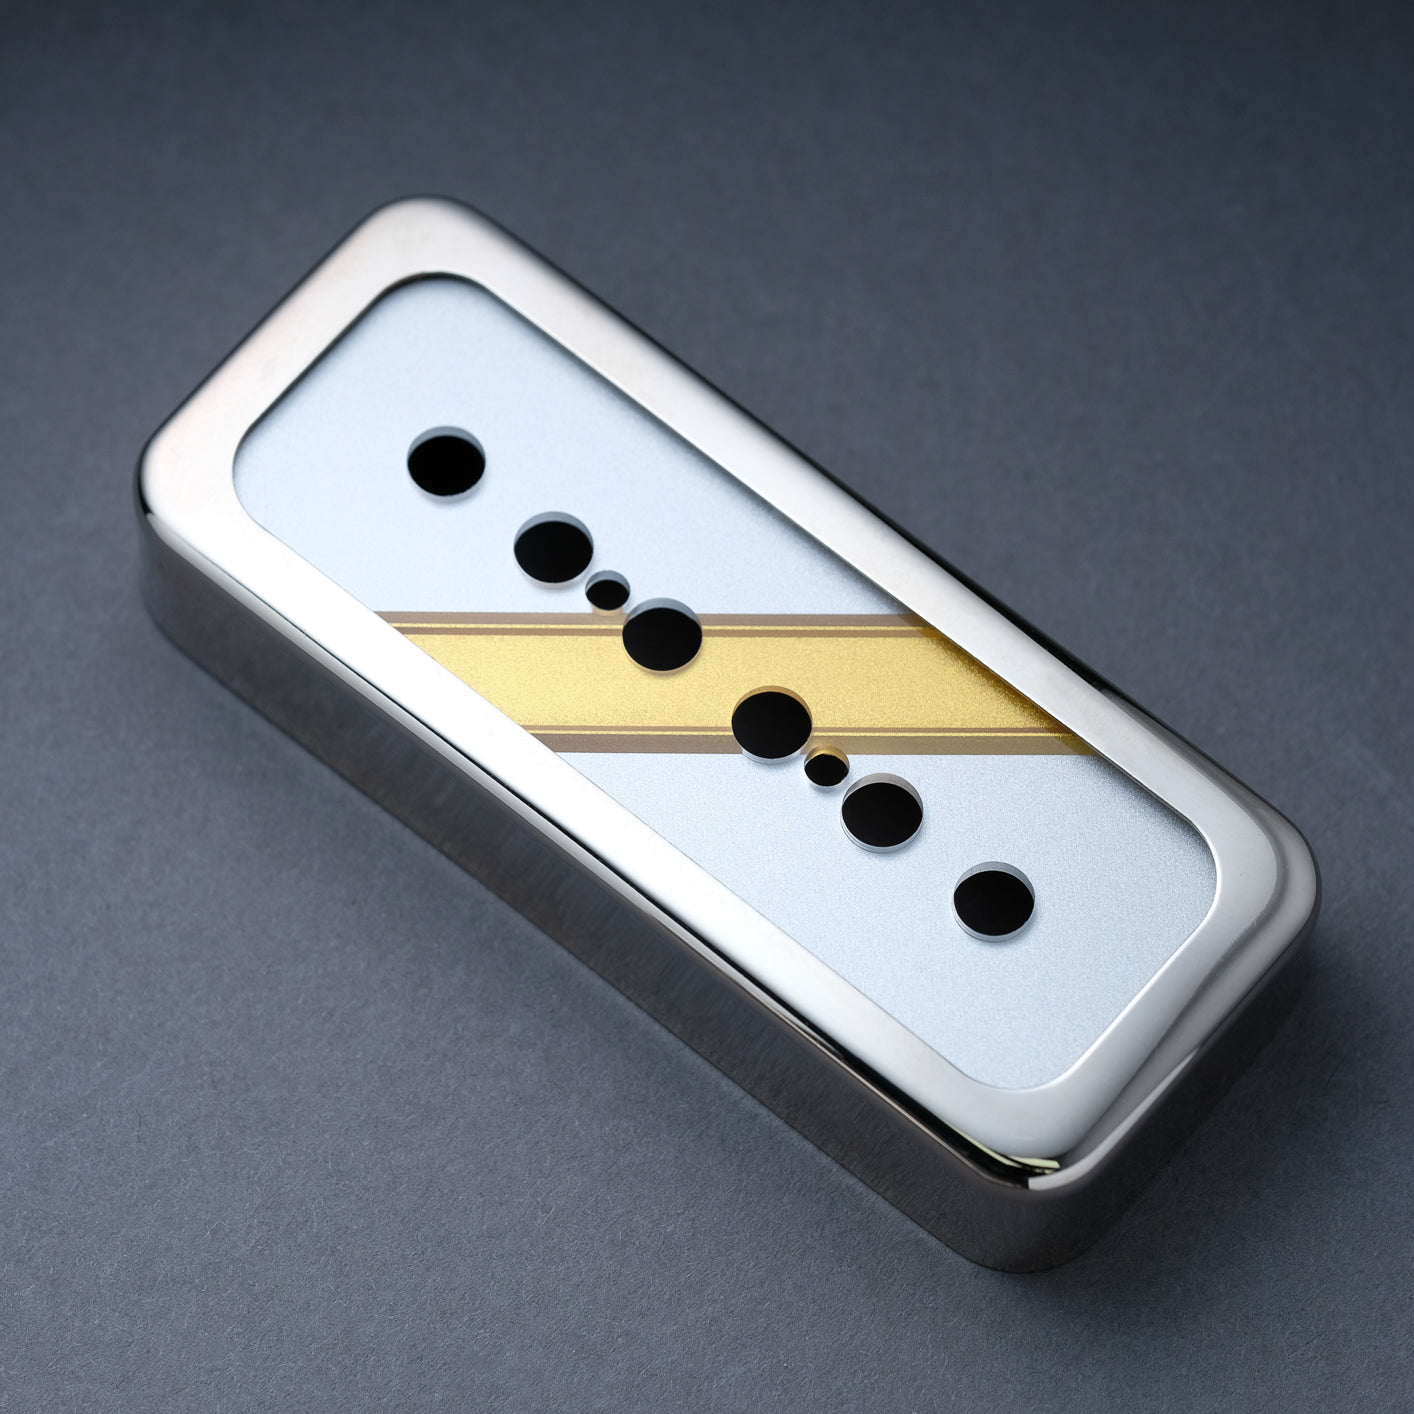 The Stripe Reversed - P90 Soapbar Cover - Nickel Trim - Gold on Silver Face